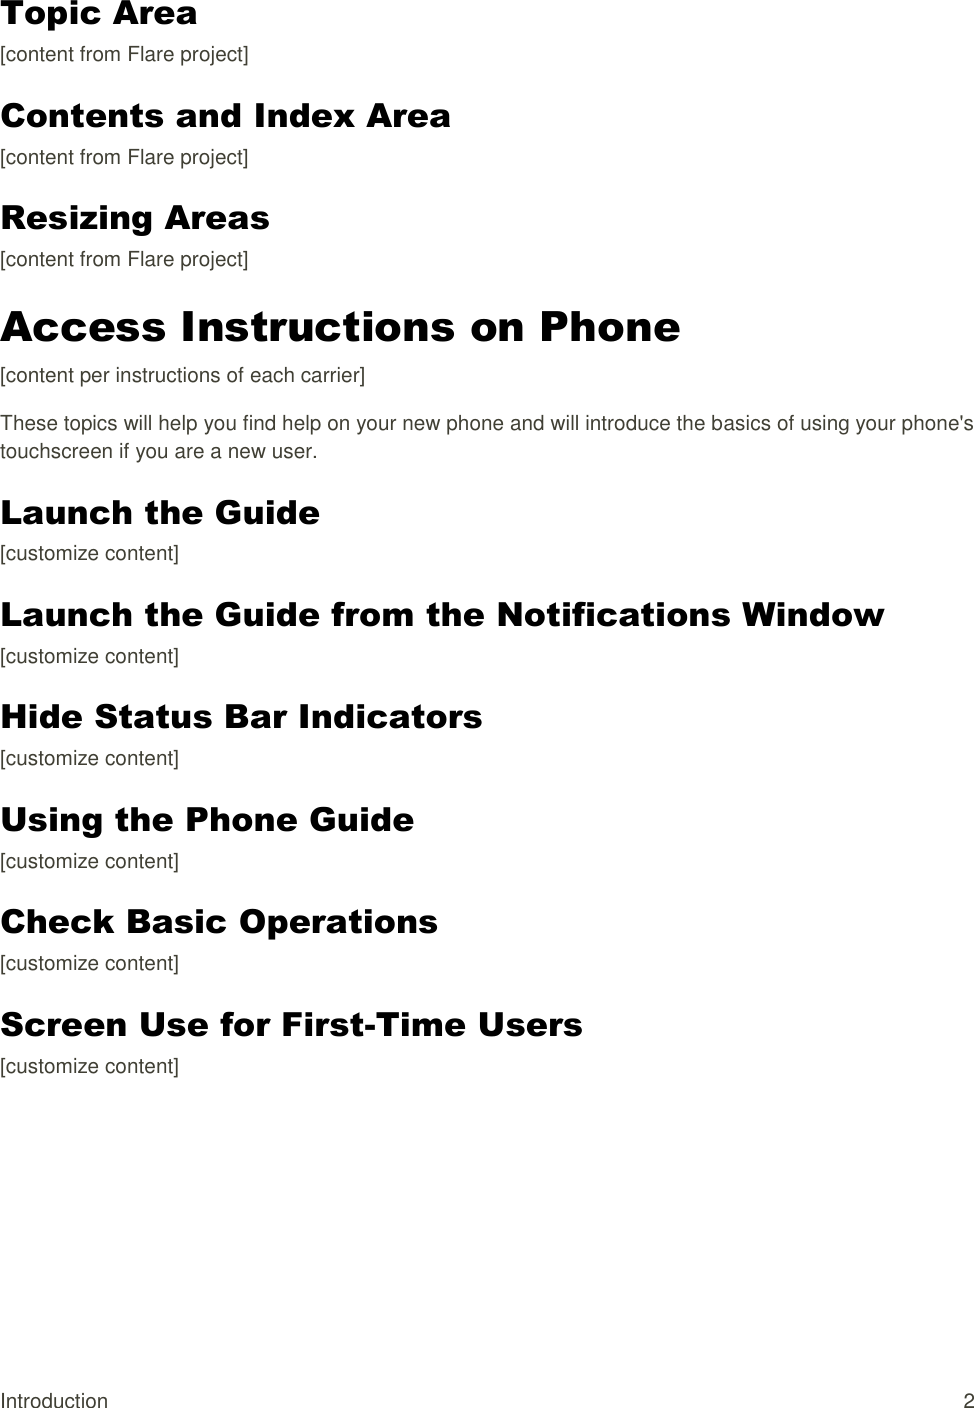 Introduction  2 Topic Area [content from Flare project] Contents and Index Area [content from Flare project] Resizing Areas [content from Flare project] Access Instructions on Phone  [content per instructions of each carrier] These topics will help you find help on your new phone and will introduce the basics of using your phone&apos;s touchscreen if you are a new user. Launch the Guide [customize content] Launch the Guide from the Notifications Window [customize content] Hide Status Bar Indicators [customize content] Using the Phone Guide [customize content] Check Basic Operations [customize content] Screen Use for First-Time Users [customize content] 